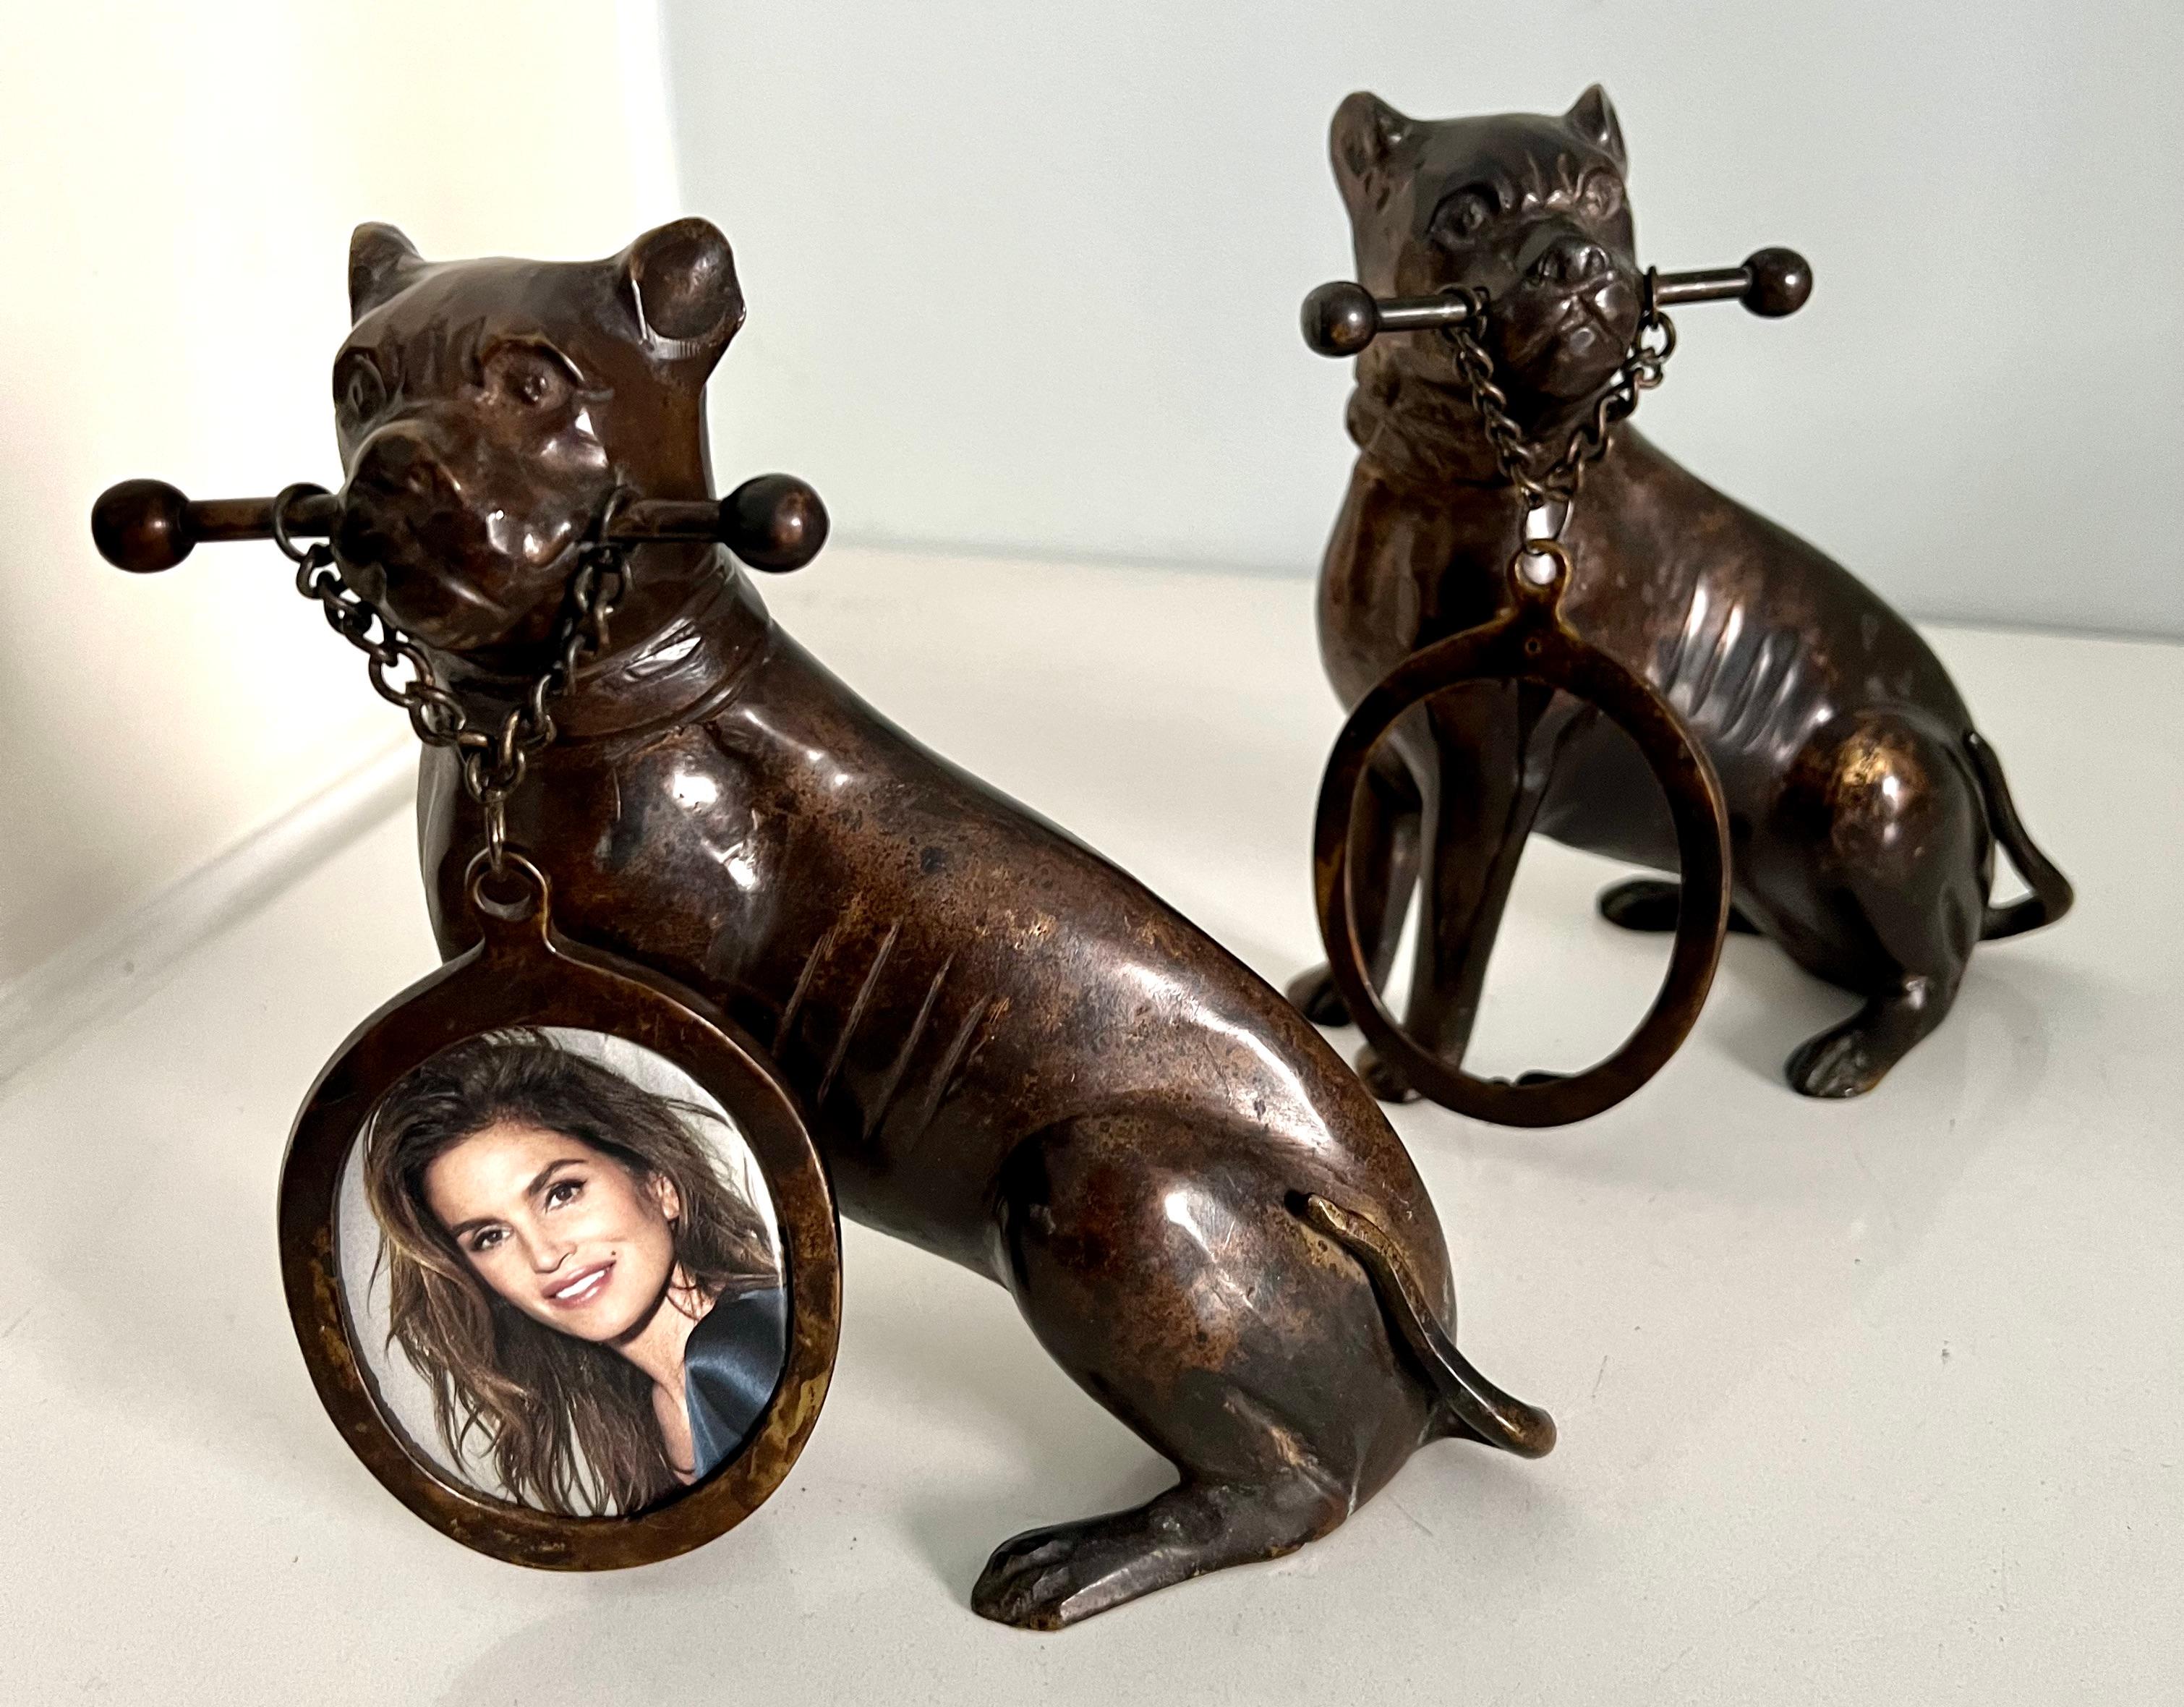 A most unique pair of Dog Bookends or sculptures holding an oval Frame from a chained post in their mouths... the pair can stand independent or could be used as bookends - either way their 2